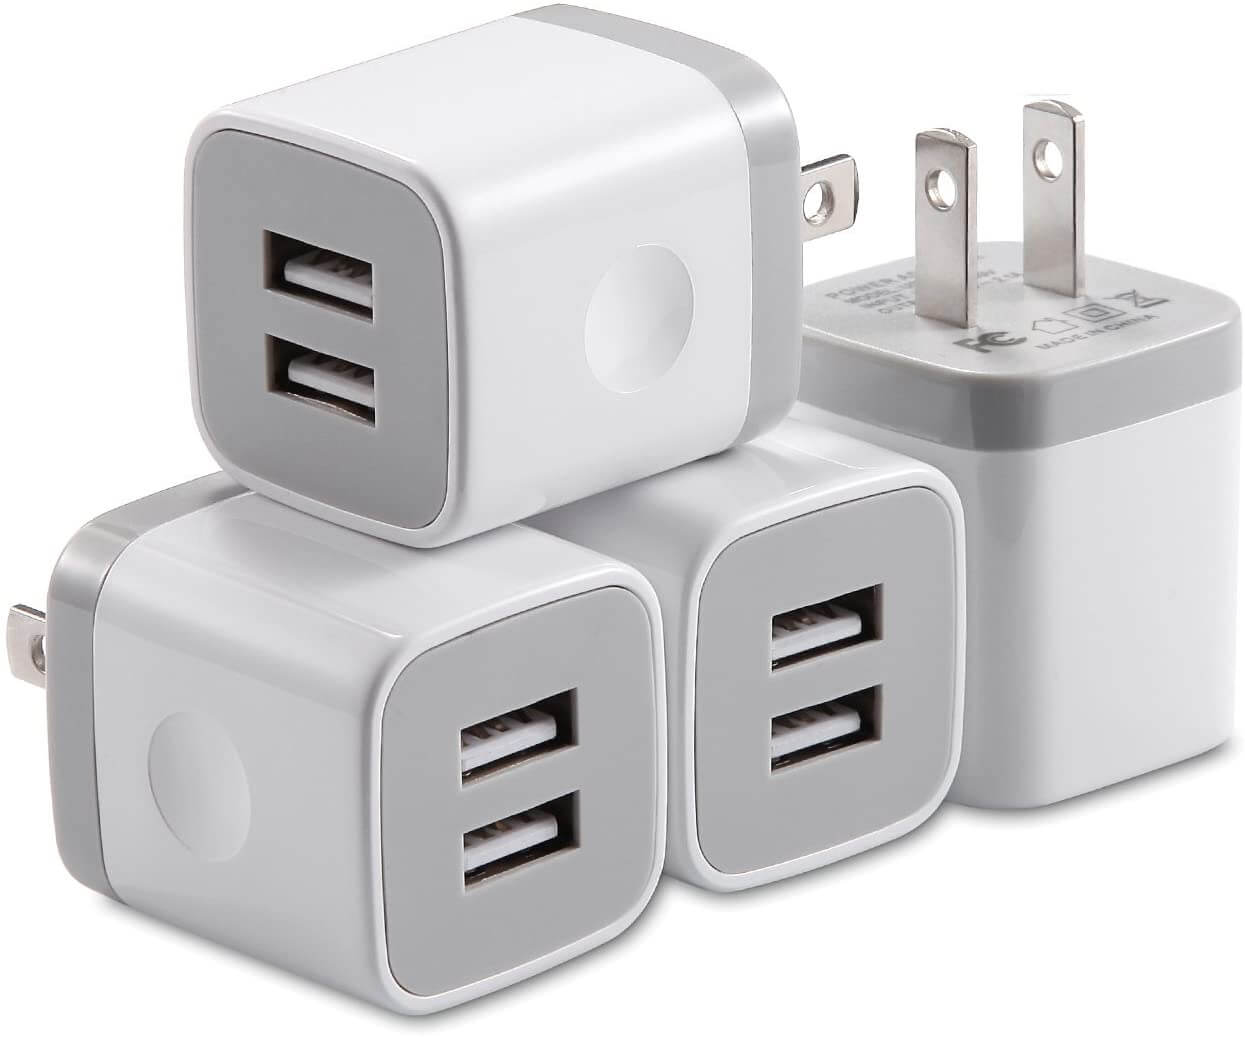 X-EDITION USB Wall Charger